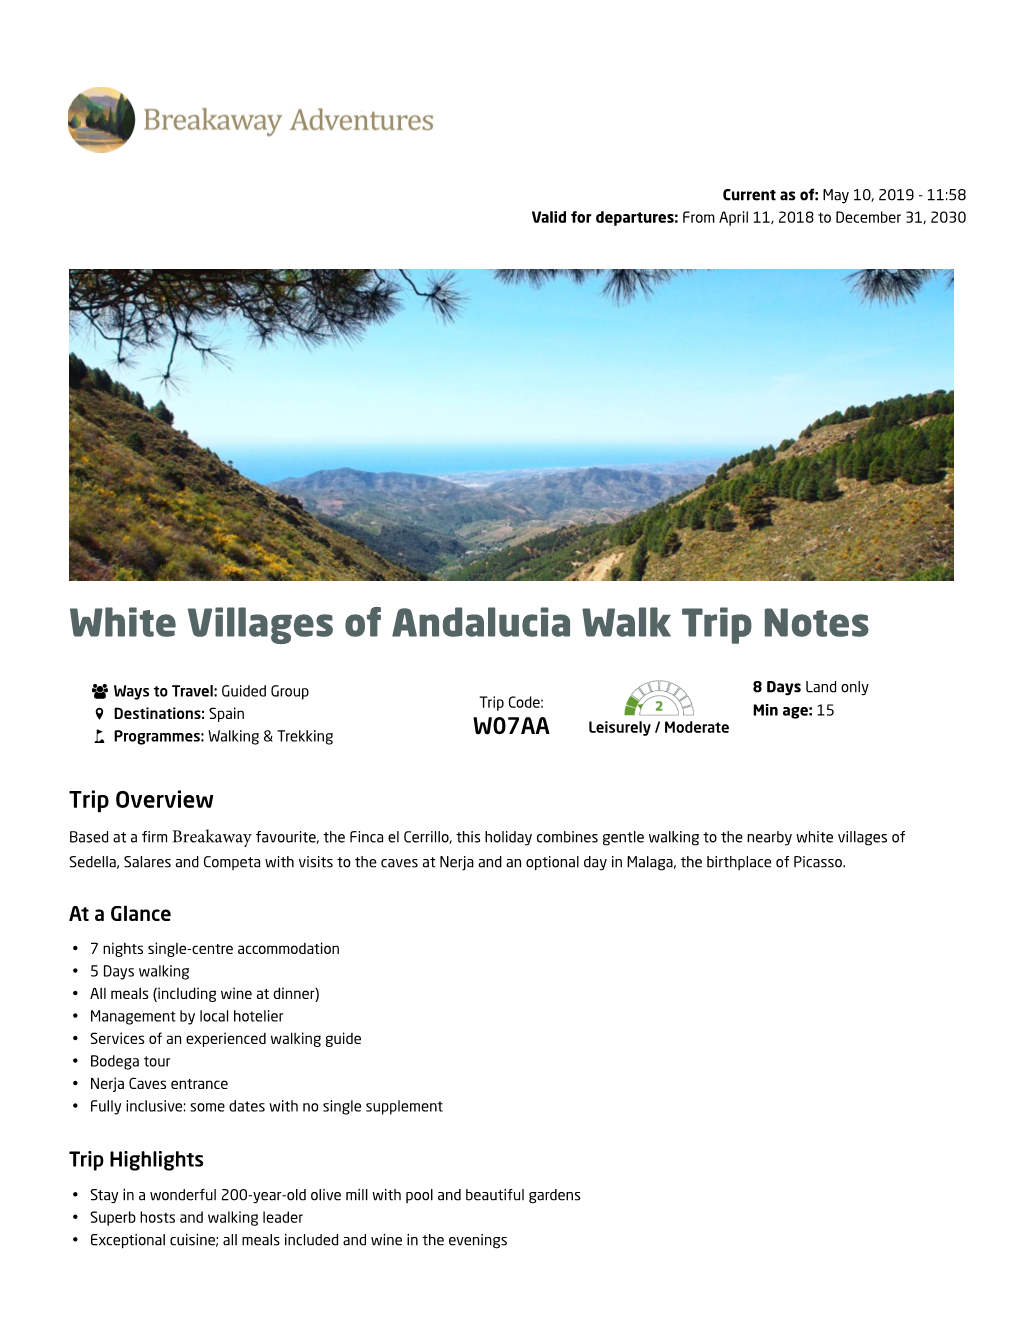 White Villages of Andalucia Walk Trip Notes